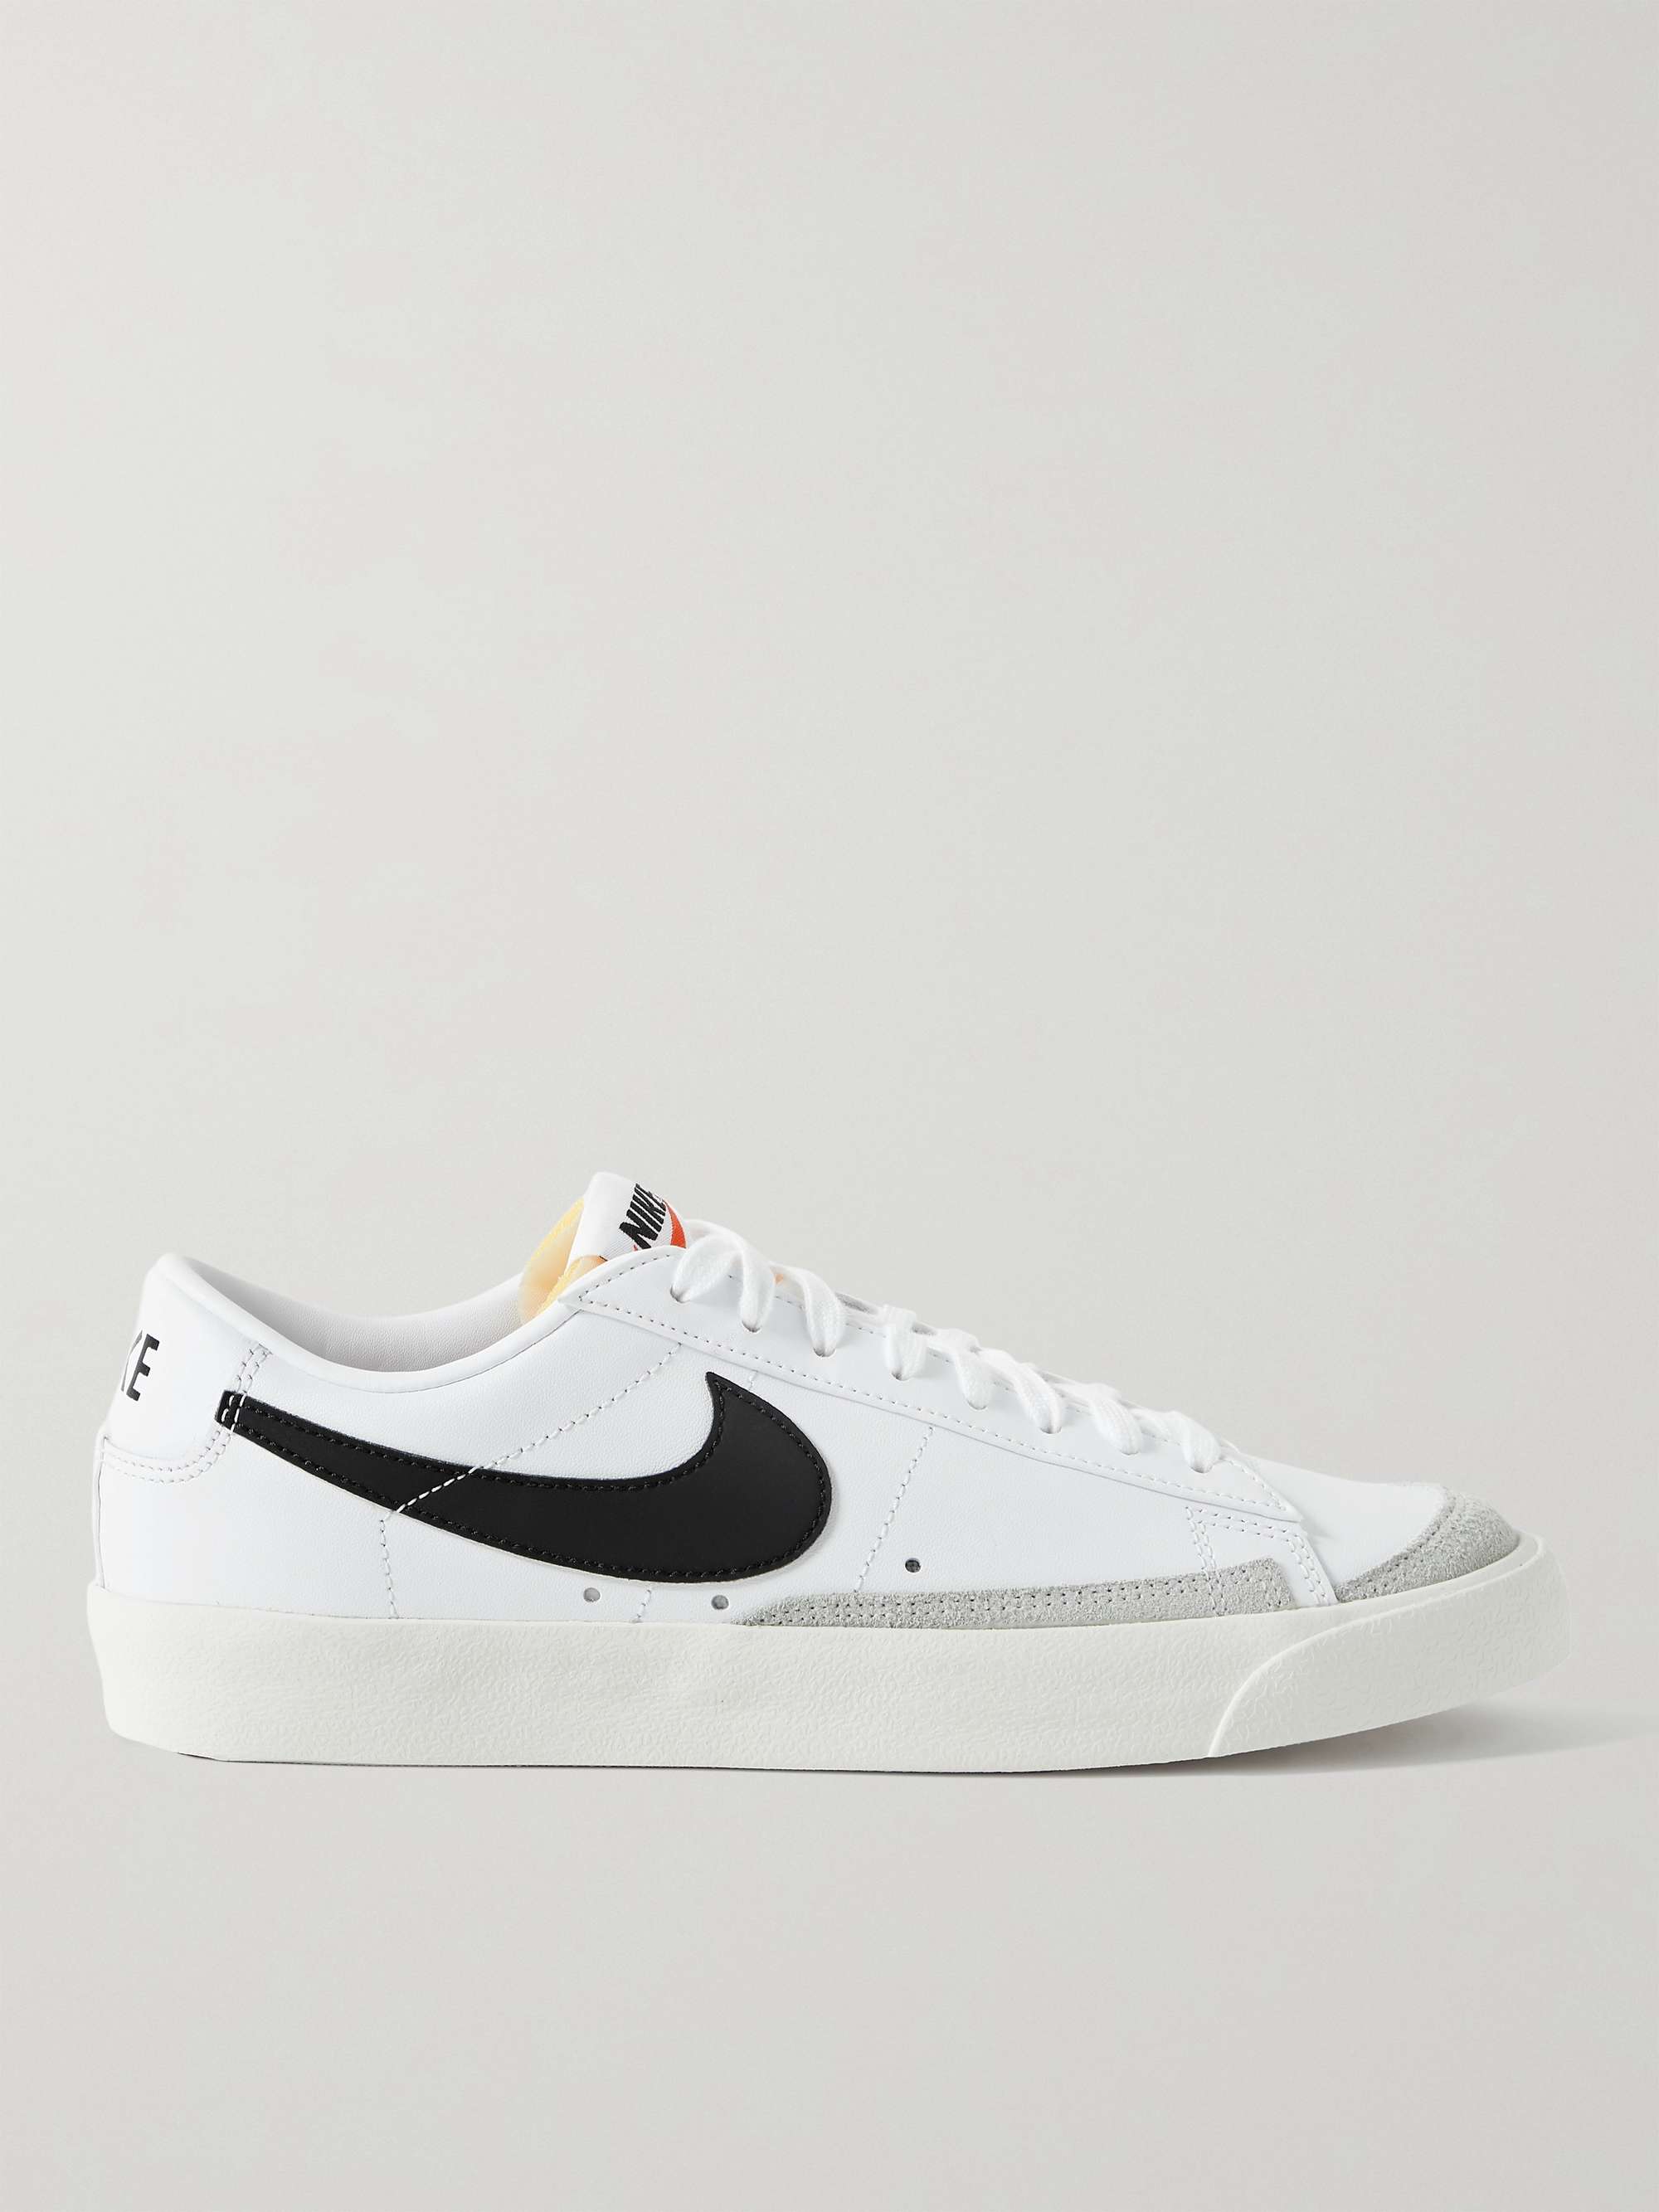 Blazer Low '77 Suede-Trimmed Leather Sneakers | MR PORTER